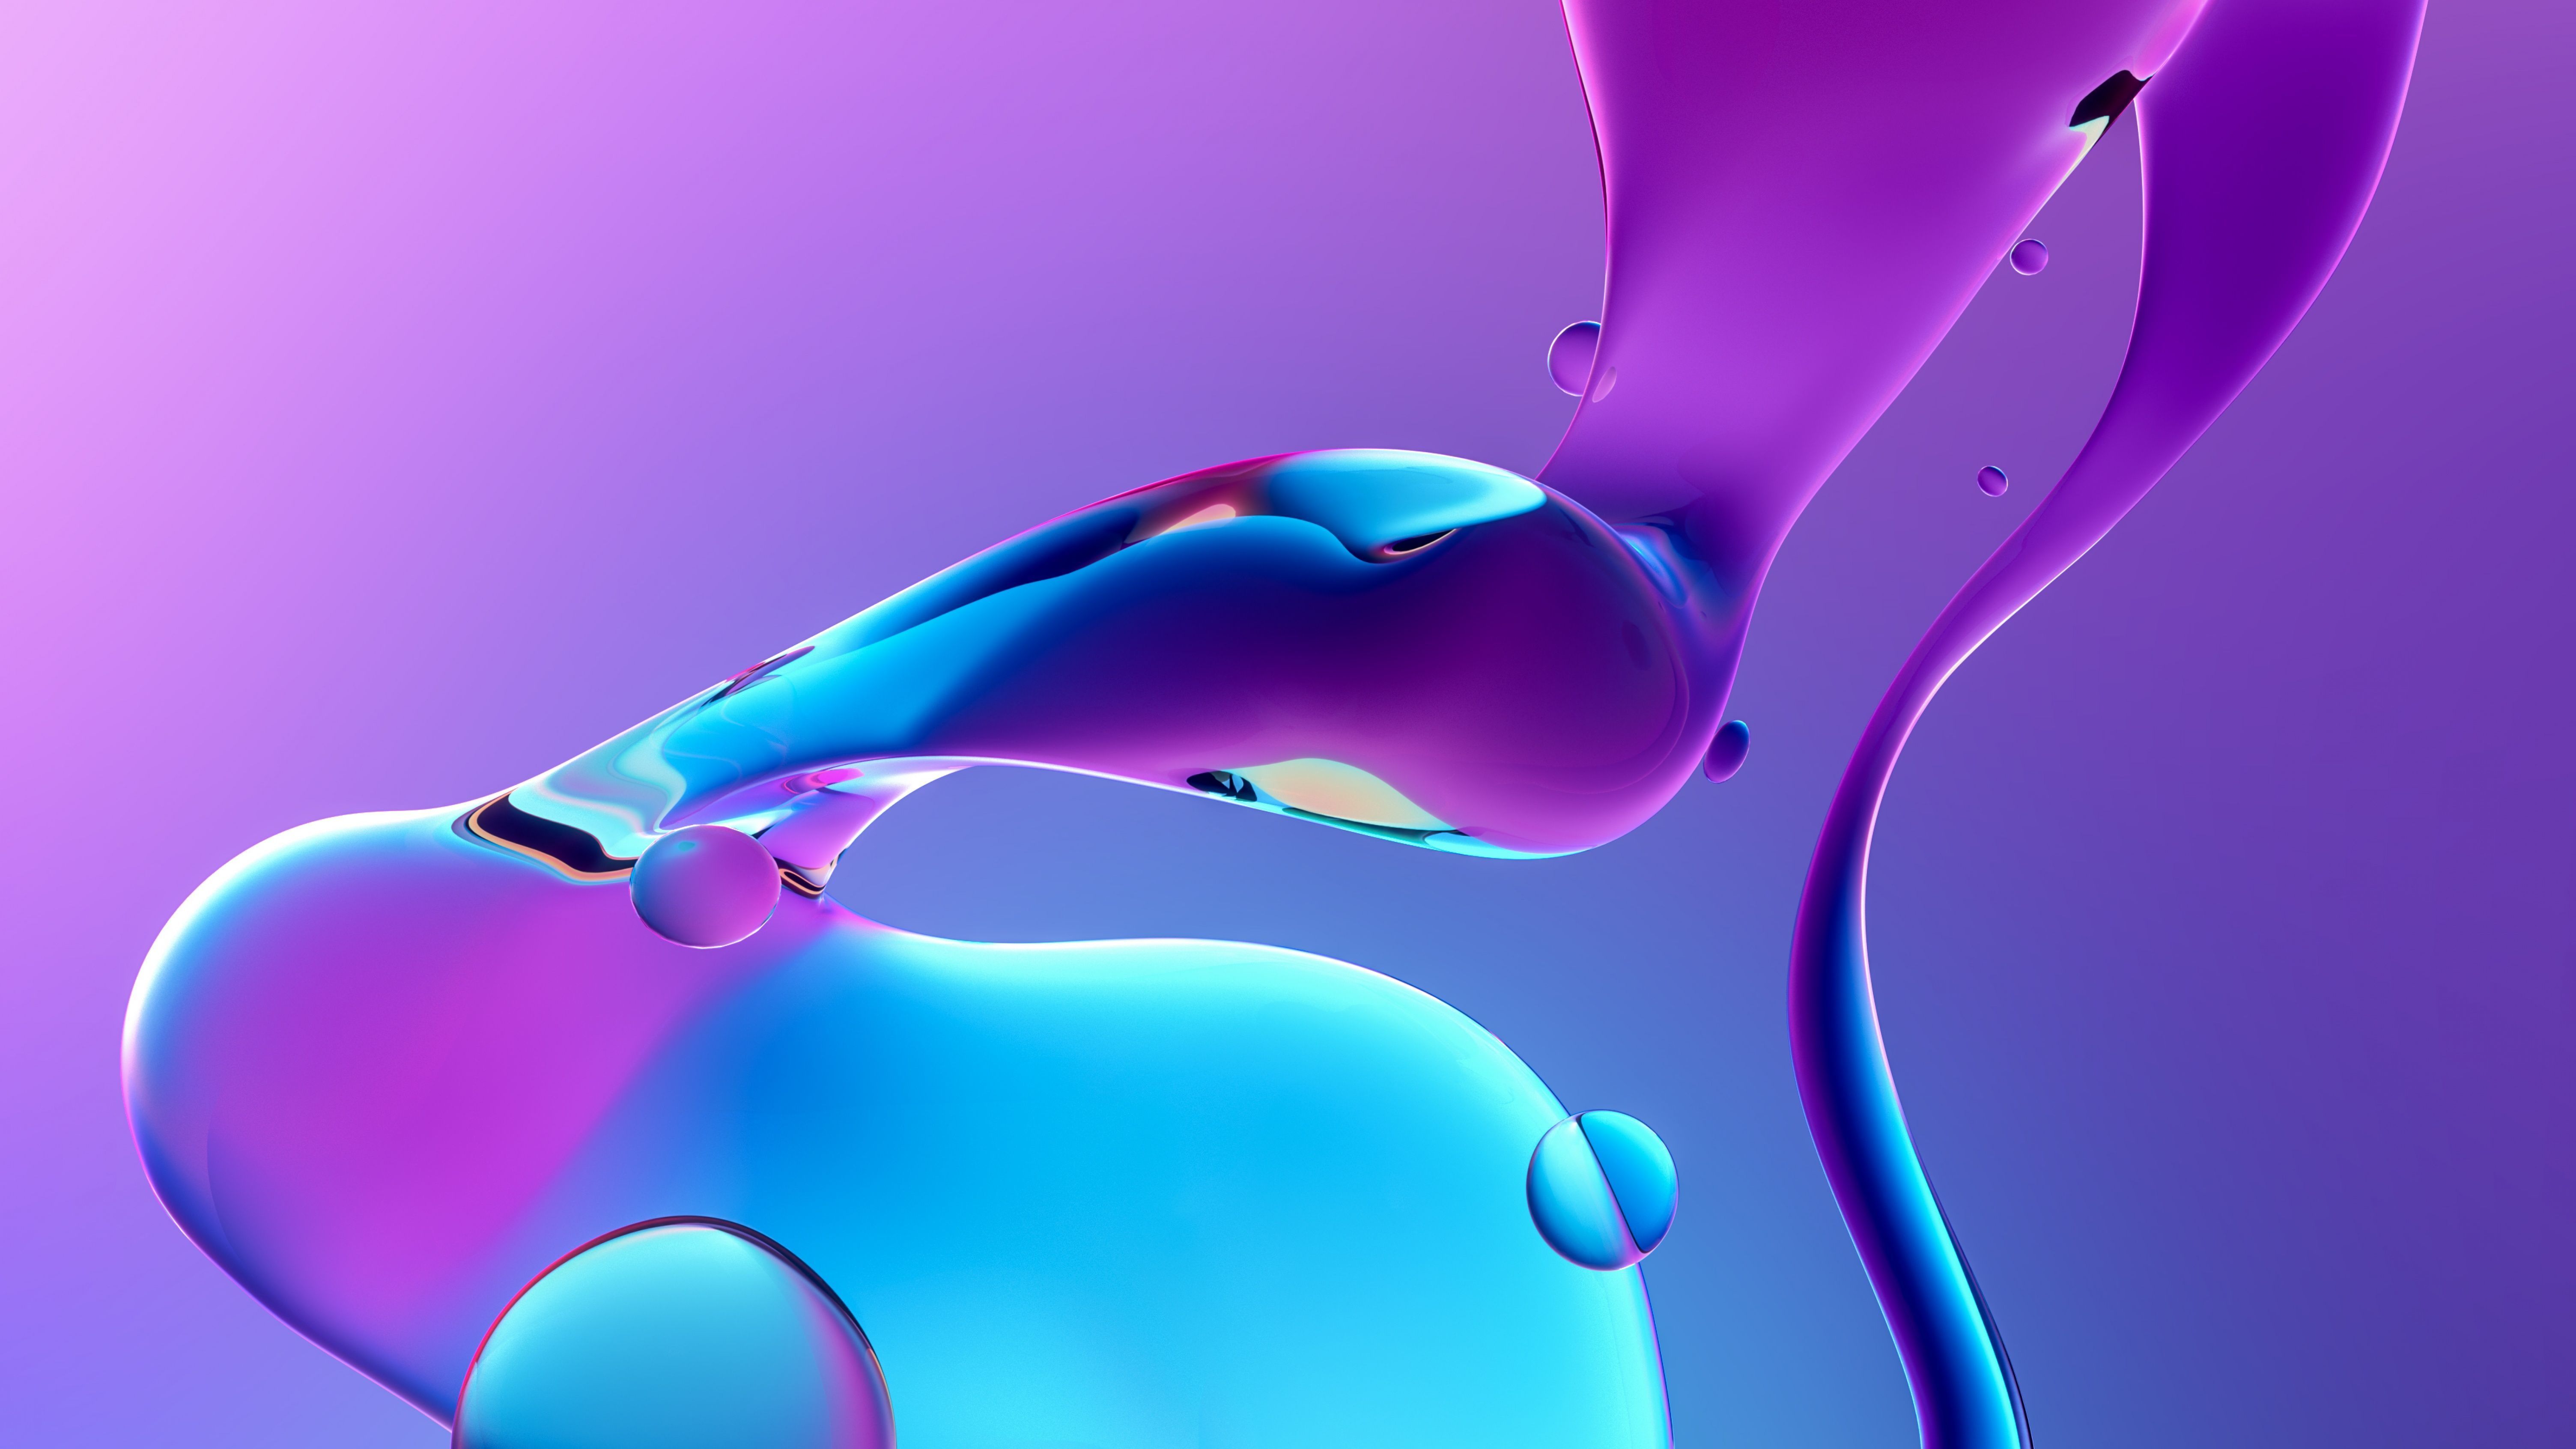 A liquid background with flowing blue and purple shapes - Glossy